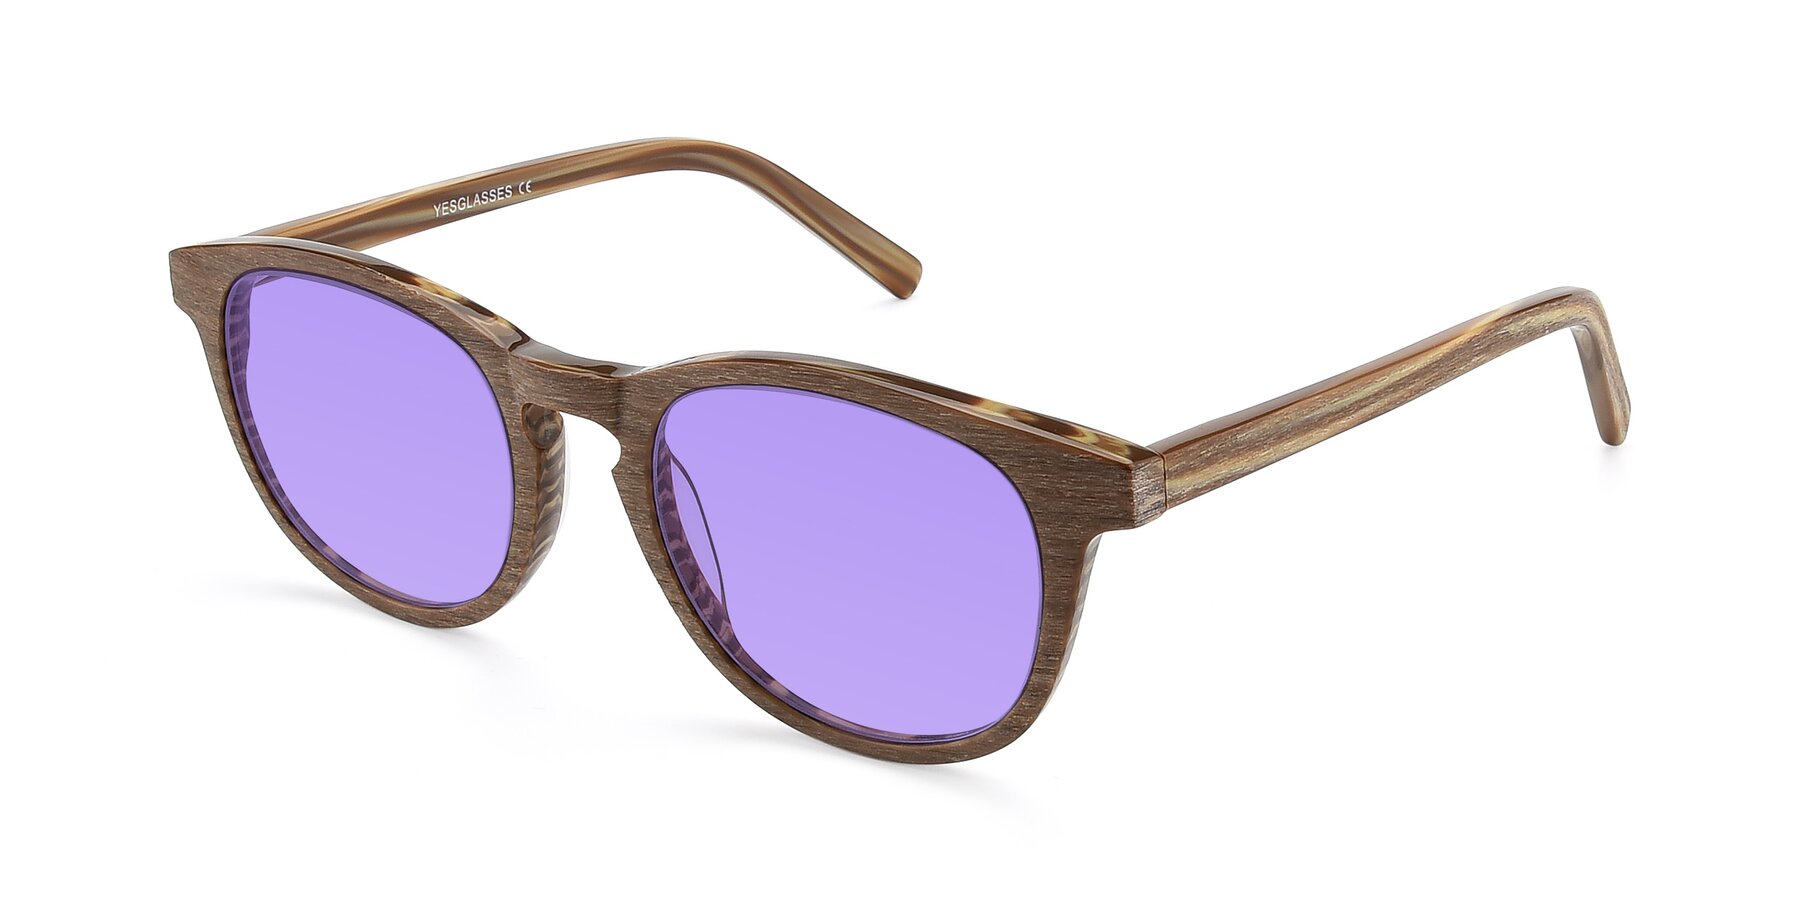 Angle of SR6044 in Brown-Wooden with Medium Purple Tinted Lenses